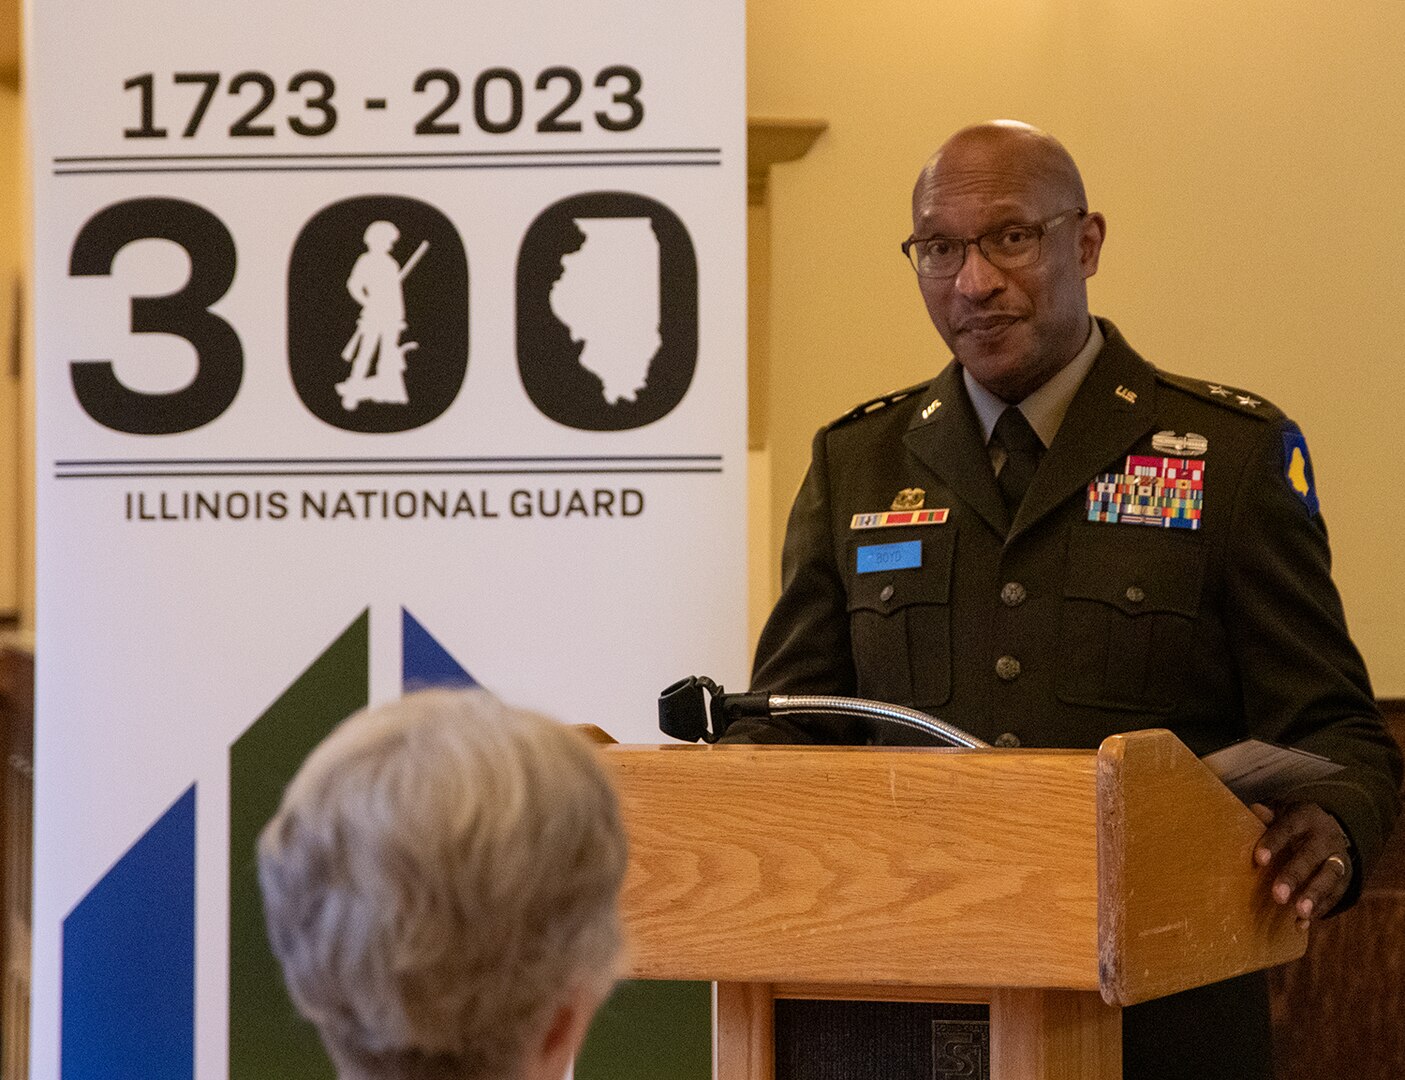 Maj. Gen. Rodney Boyd, Assistant Adjutant General-Army and Commander of the Illinois Army National Guard, addresses the crowd during a ceremony commemorating the 78th anniversary of the rescue of King Leopold III from German Nazis during World War II by Soldiers from the Illinois Army National Guard’s 106th Cavalry Regiment and marking the 300th birthday of the Illinois National Guard in Springfield May 6.